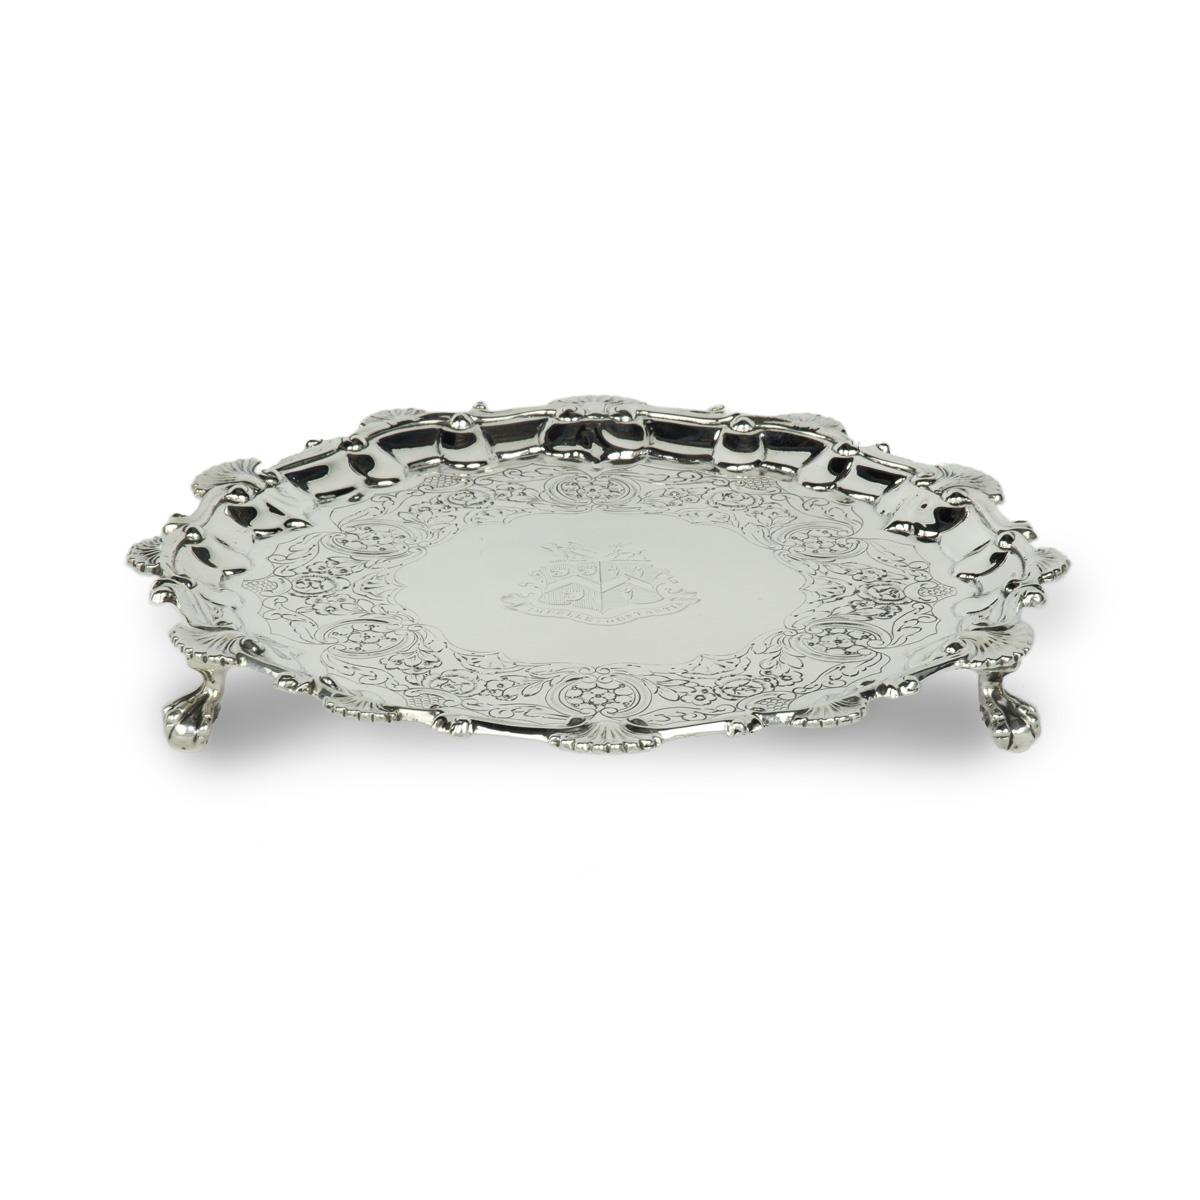 George IV crested silver tray commemorating the marriage of Lieutenant Colonel Thomas Arthur, 3rd Dragoon Guards